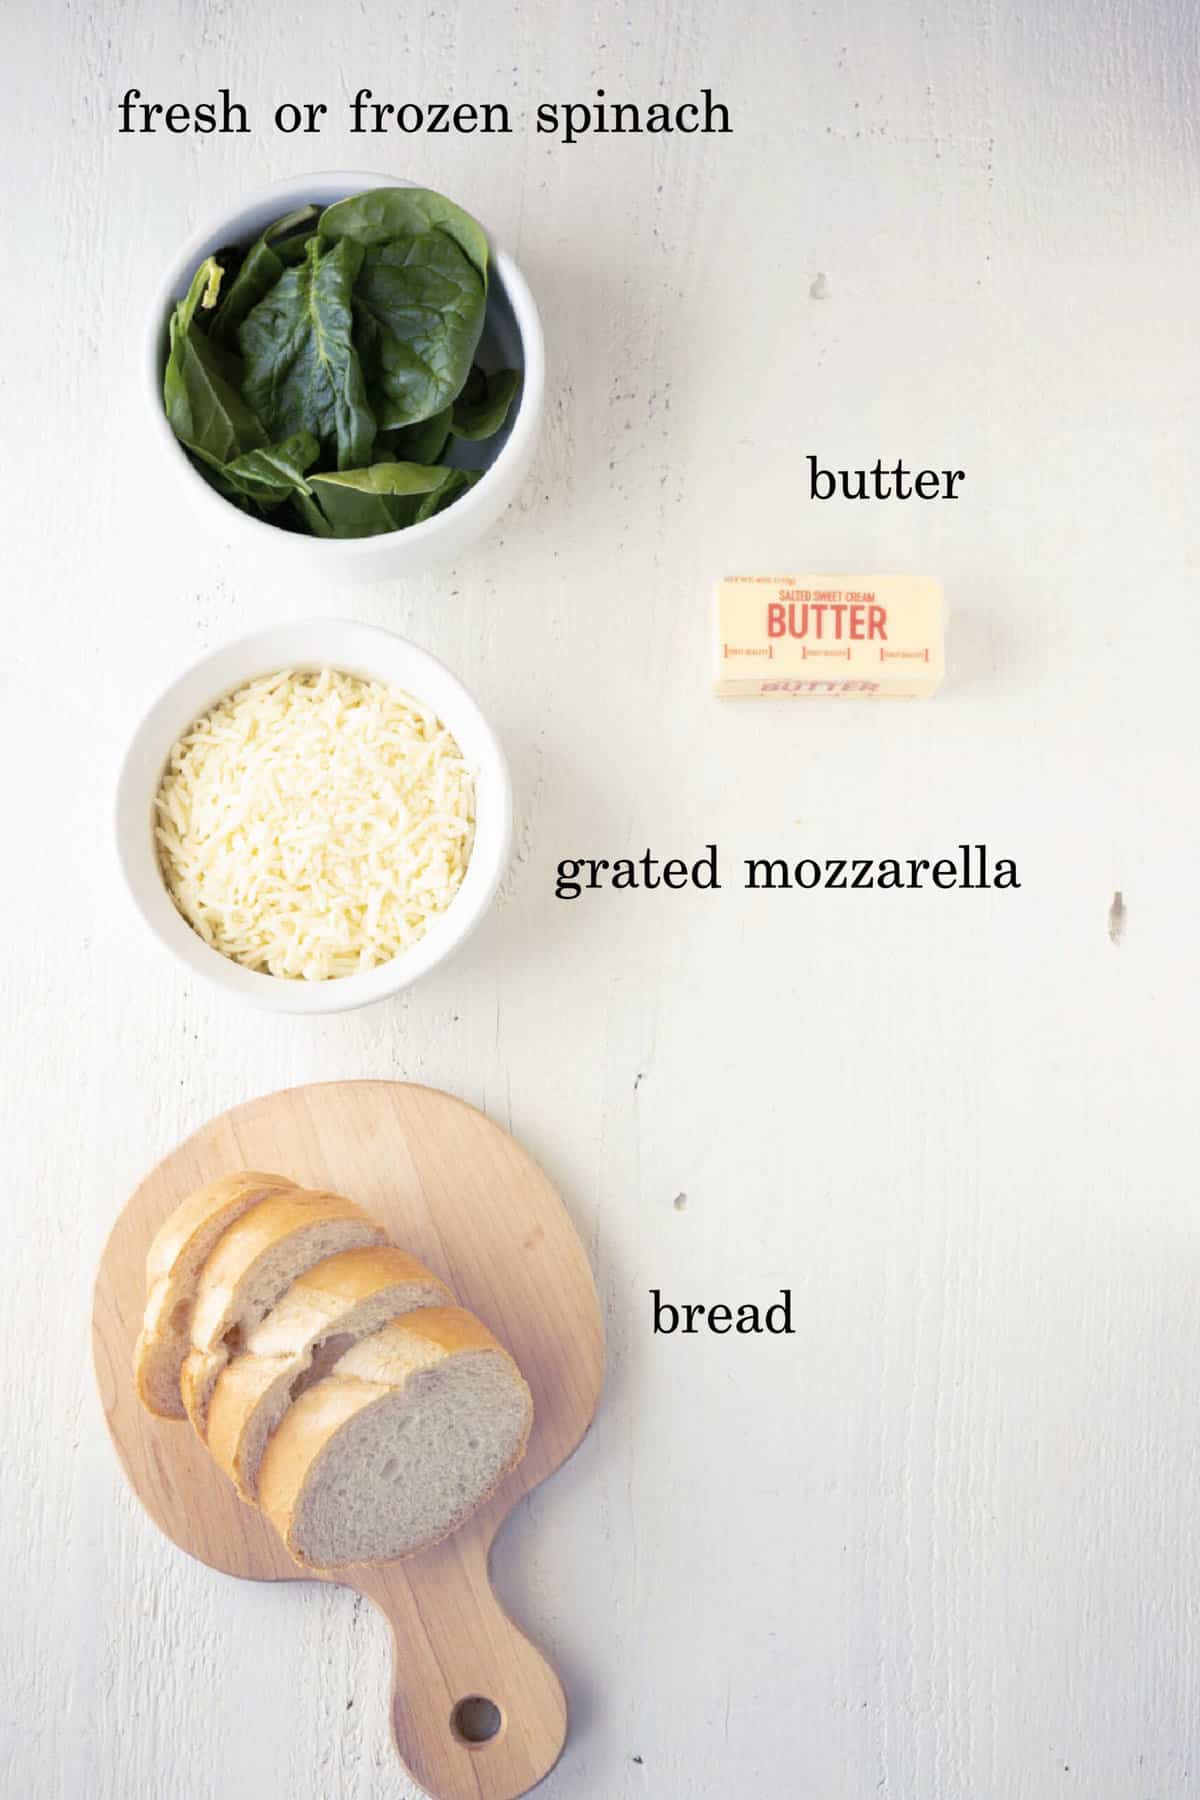 Spinach, grated mozzarella cheese, butter, and bread to make grilled cheese sandwich.